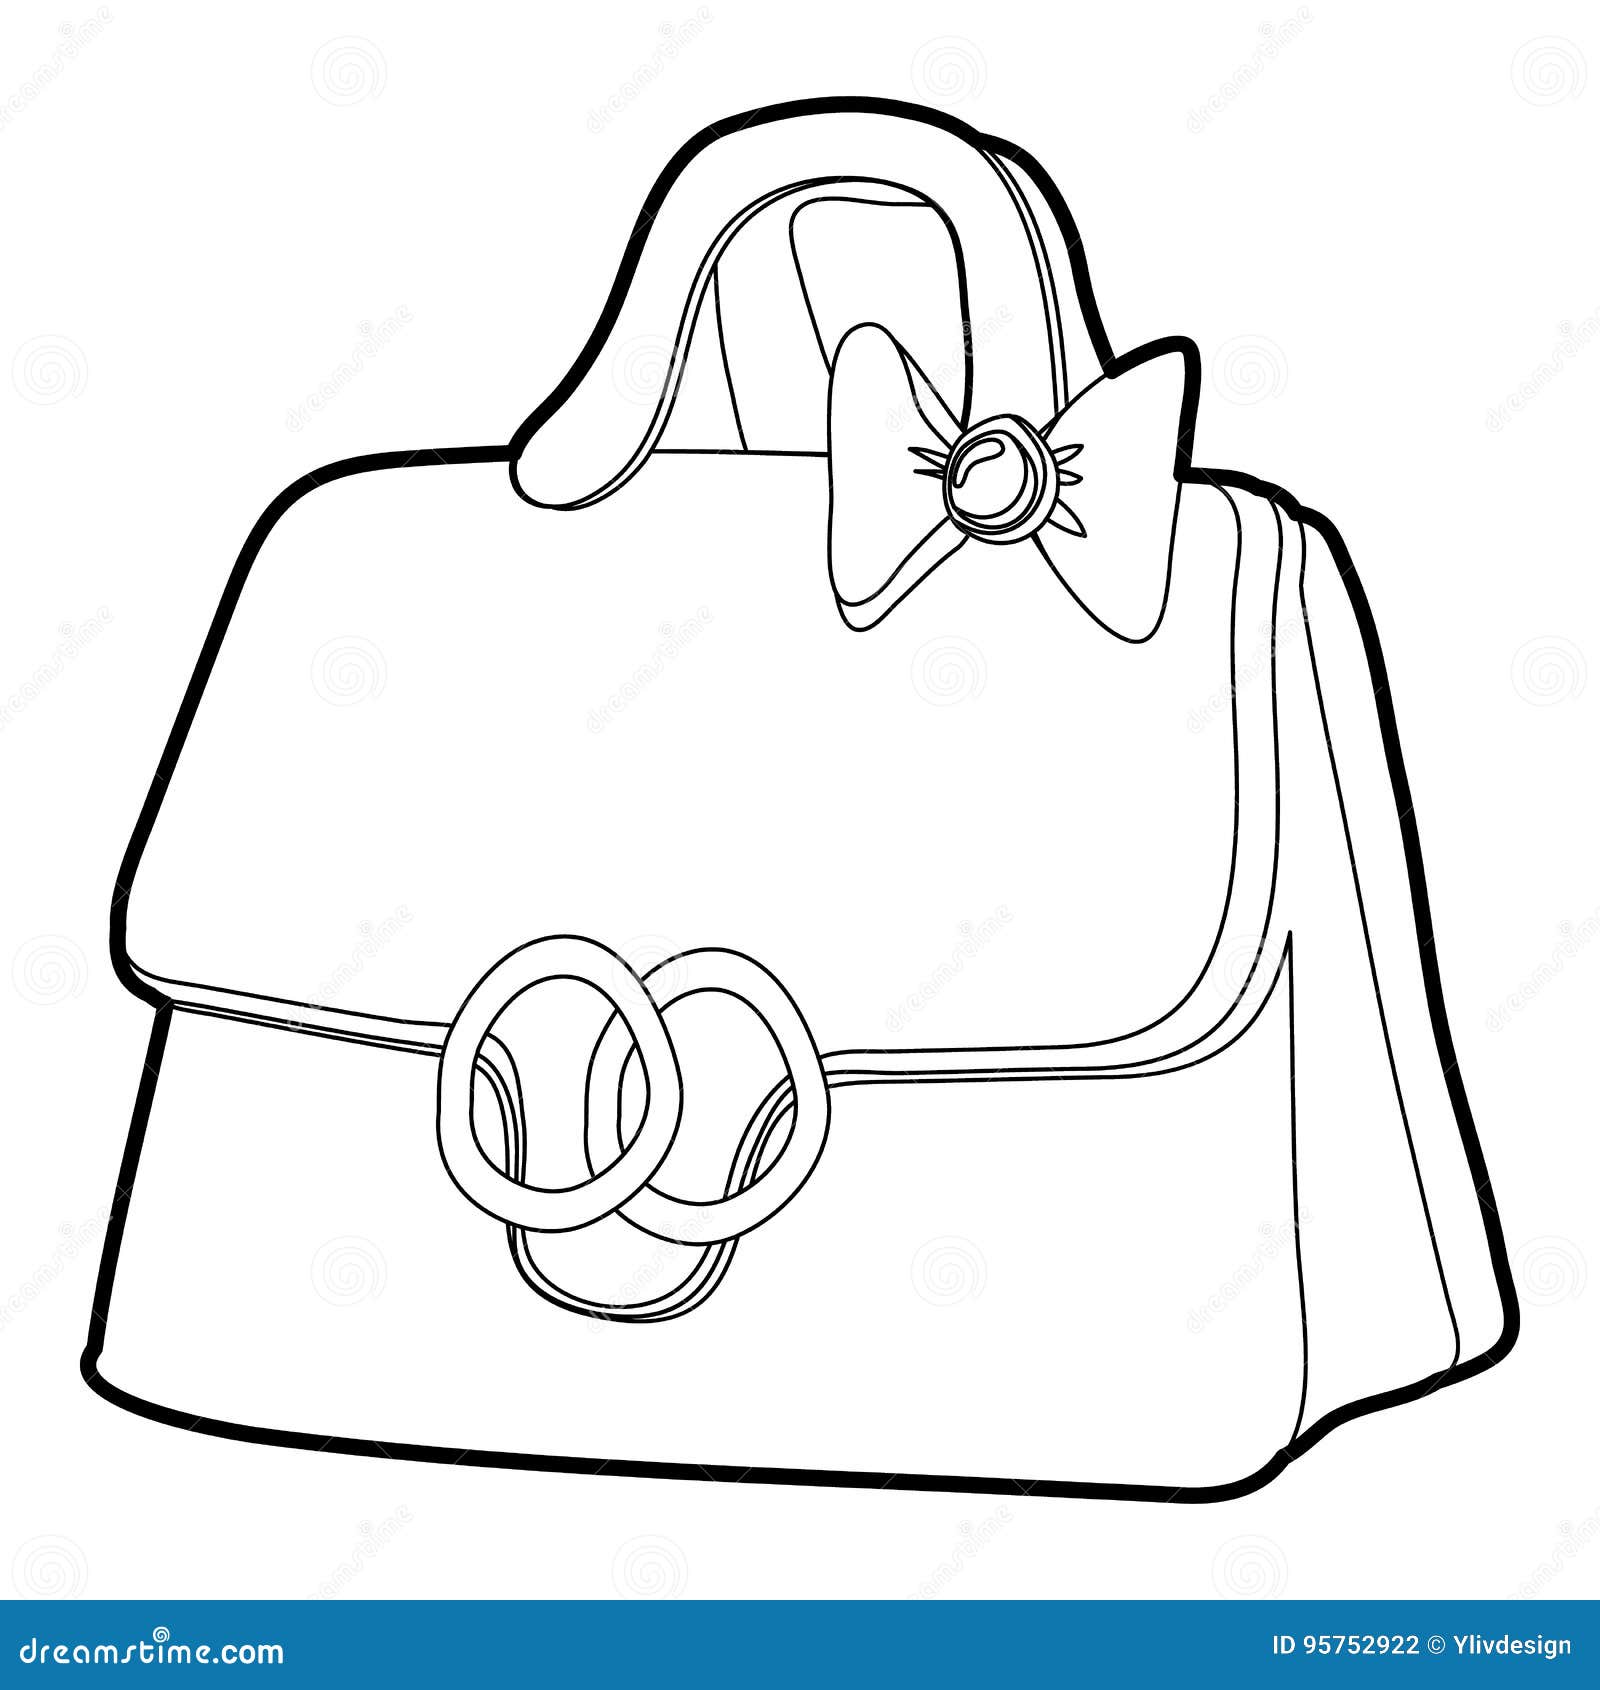 Oversized Purse Stock Vector Illustration and Royalty Free Oversized Purse  Clipart